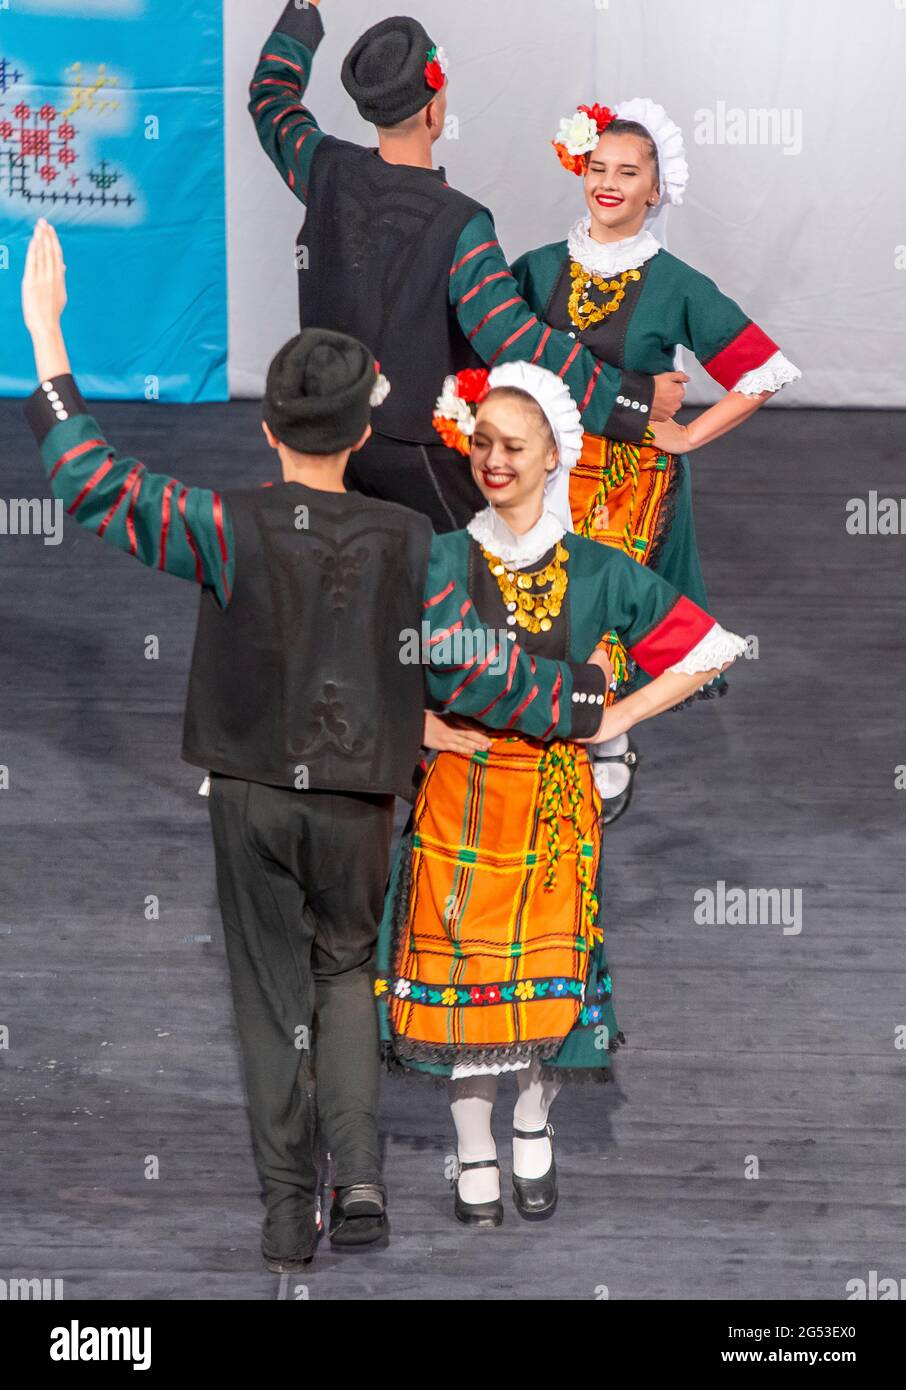 Sliven, Bulgaria - June 20th 2021: Young Bulgarian men and women performing folk dances in traditional dress Stock Photo